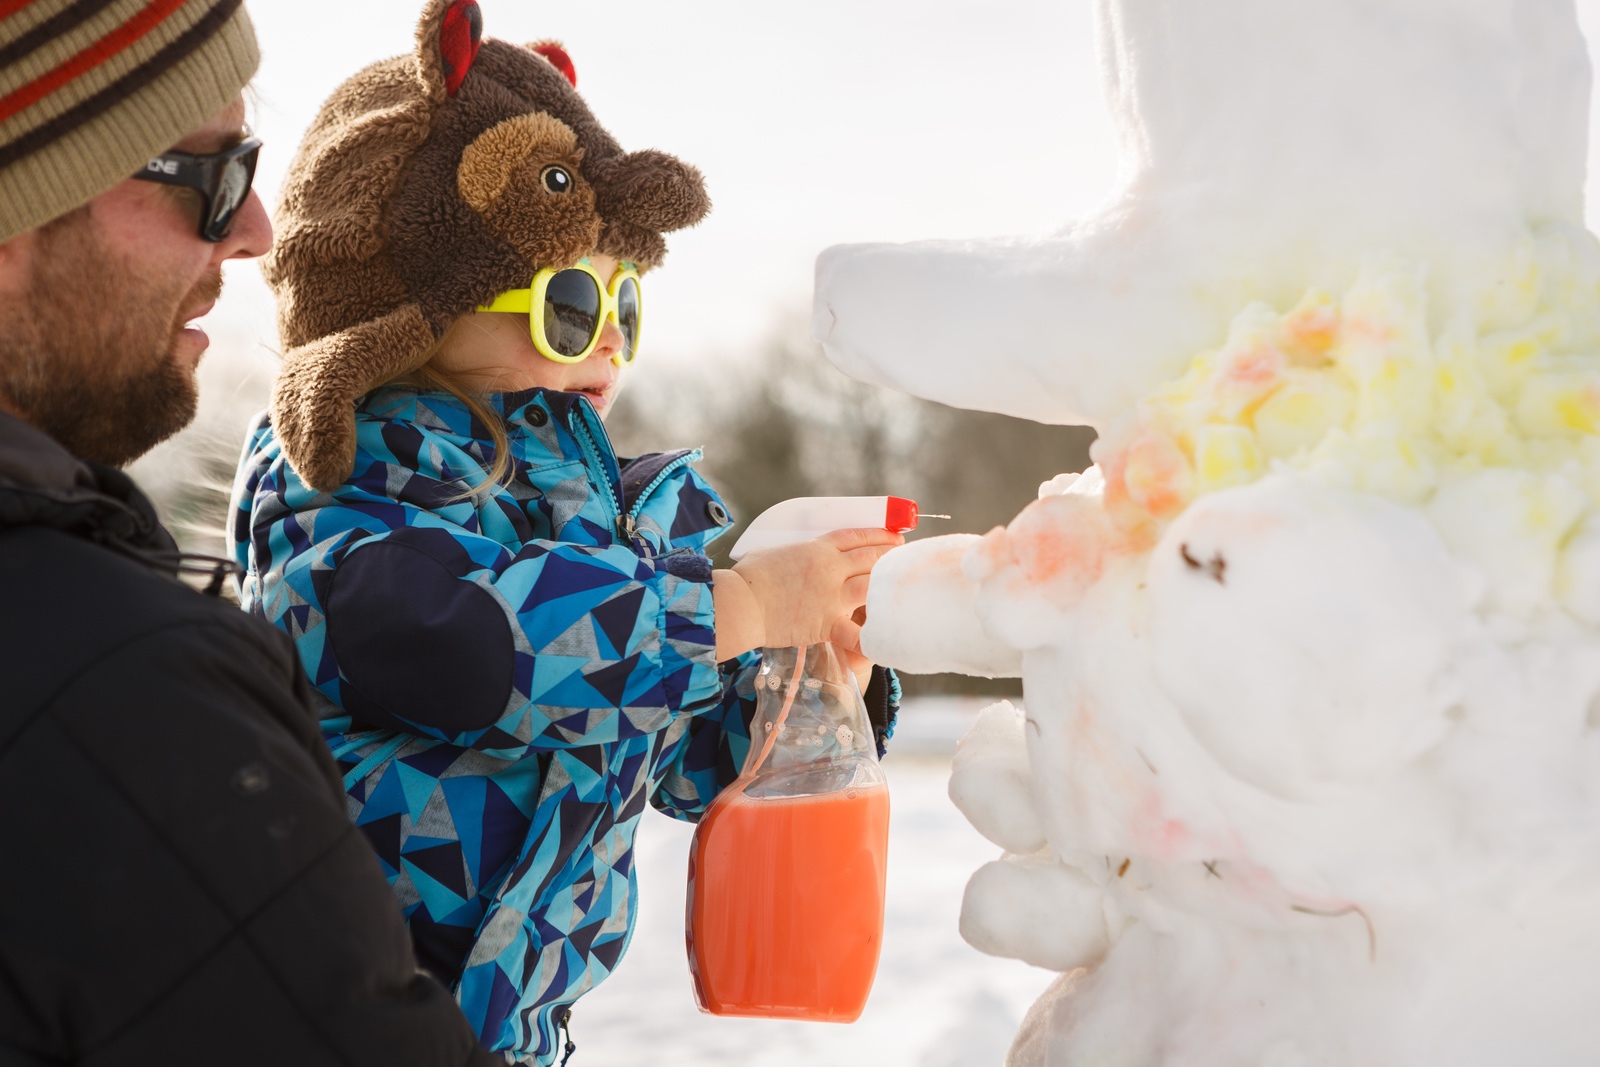 12 Ideas for Outdoor Winter Fun WinterKids Misc405 welcome to winter festival 2018 payson park outdoor activites maine event photographer whitney j fox 2069